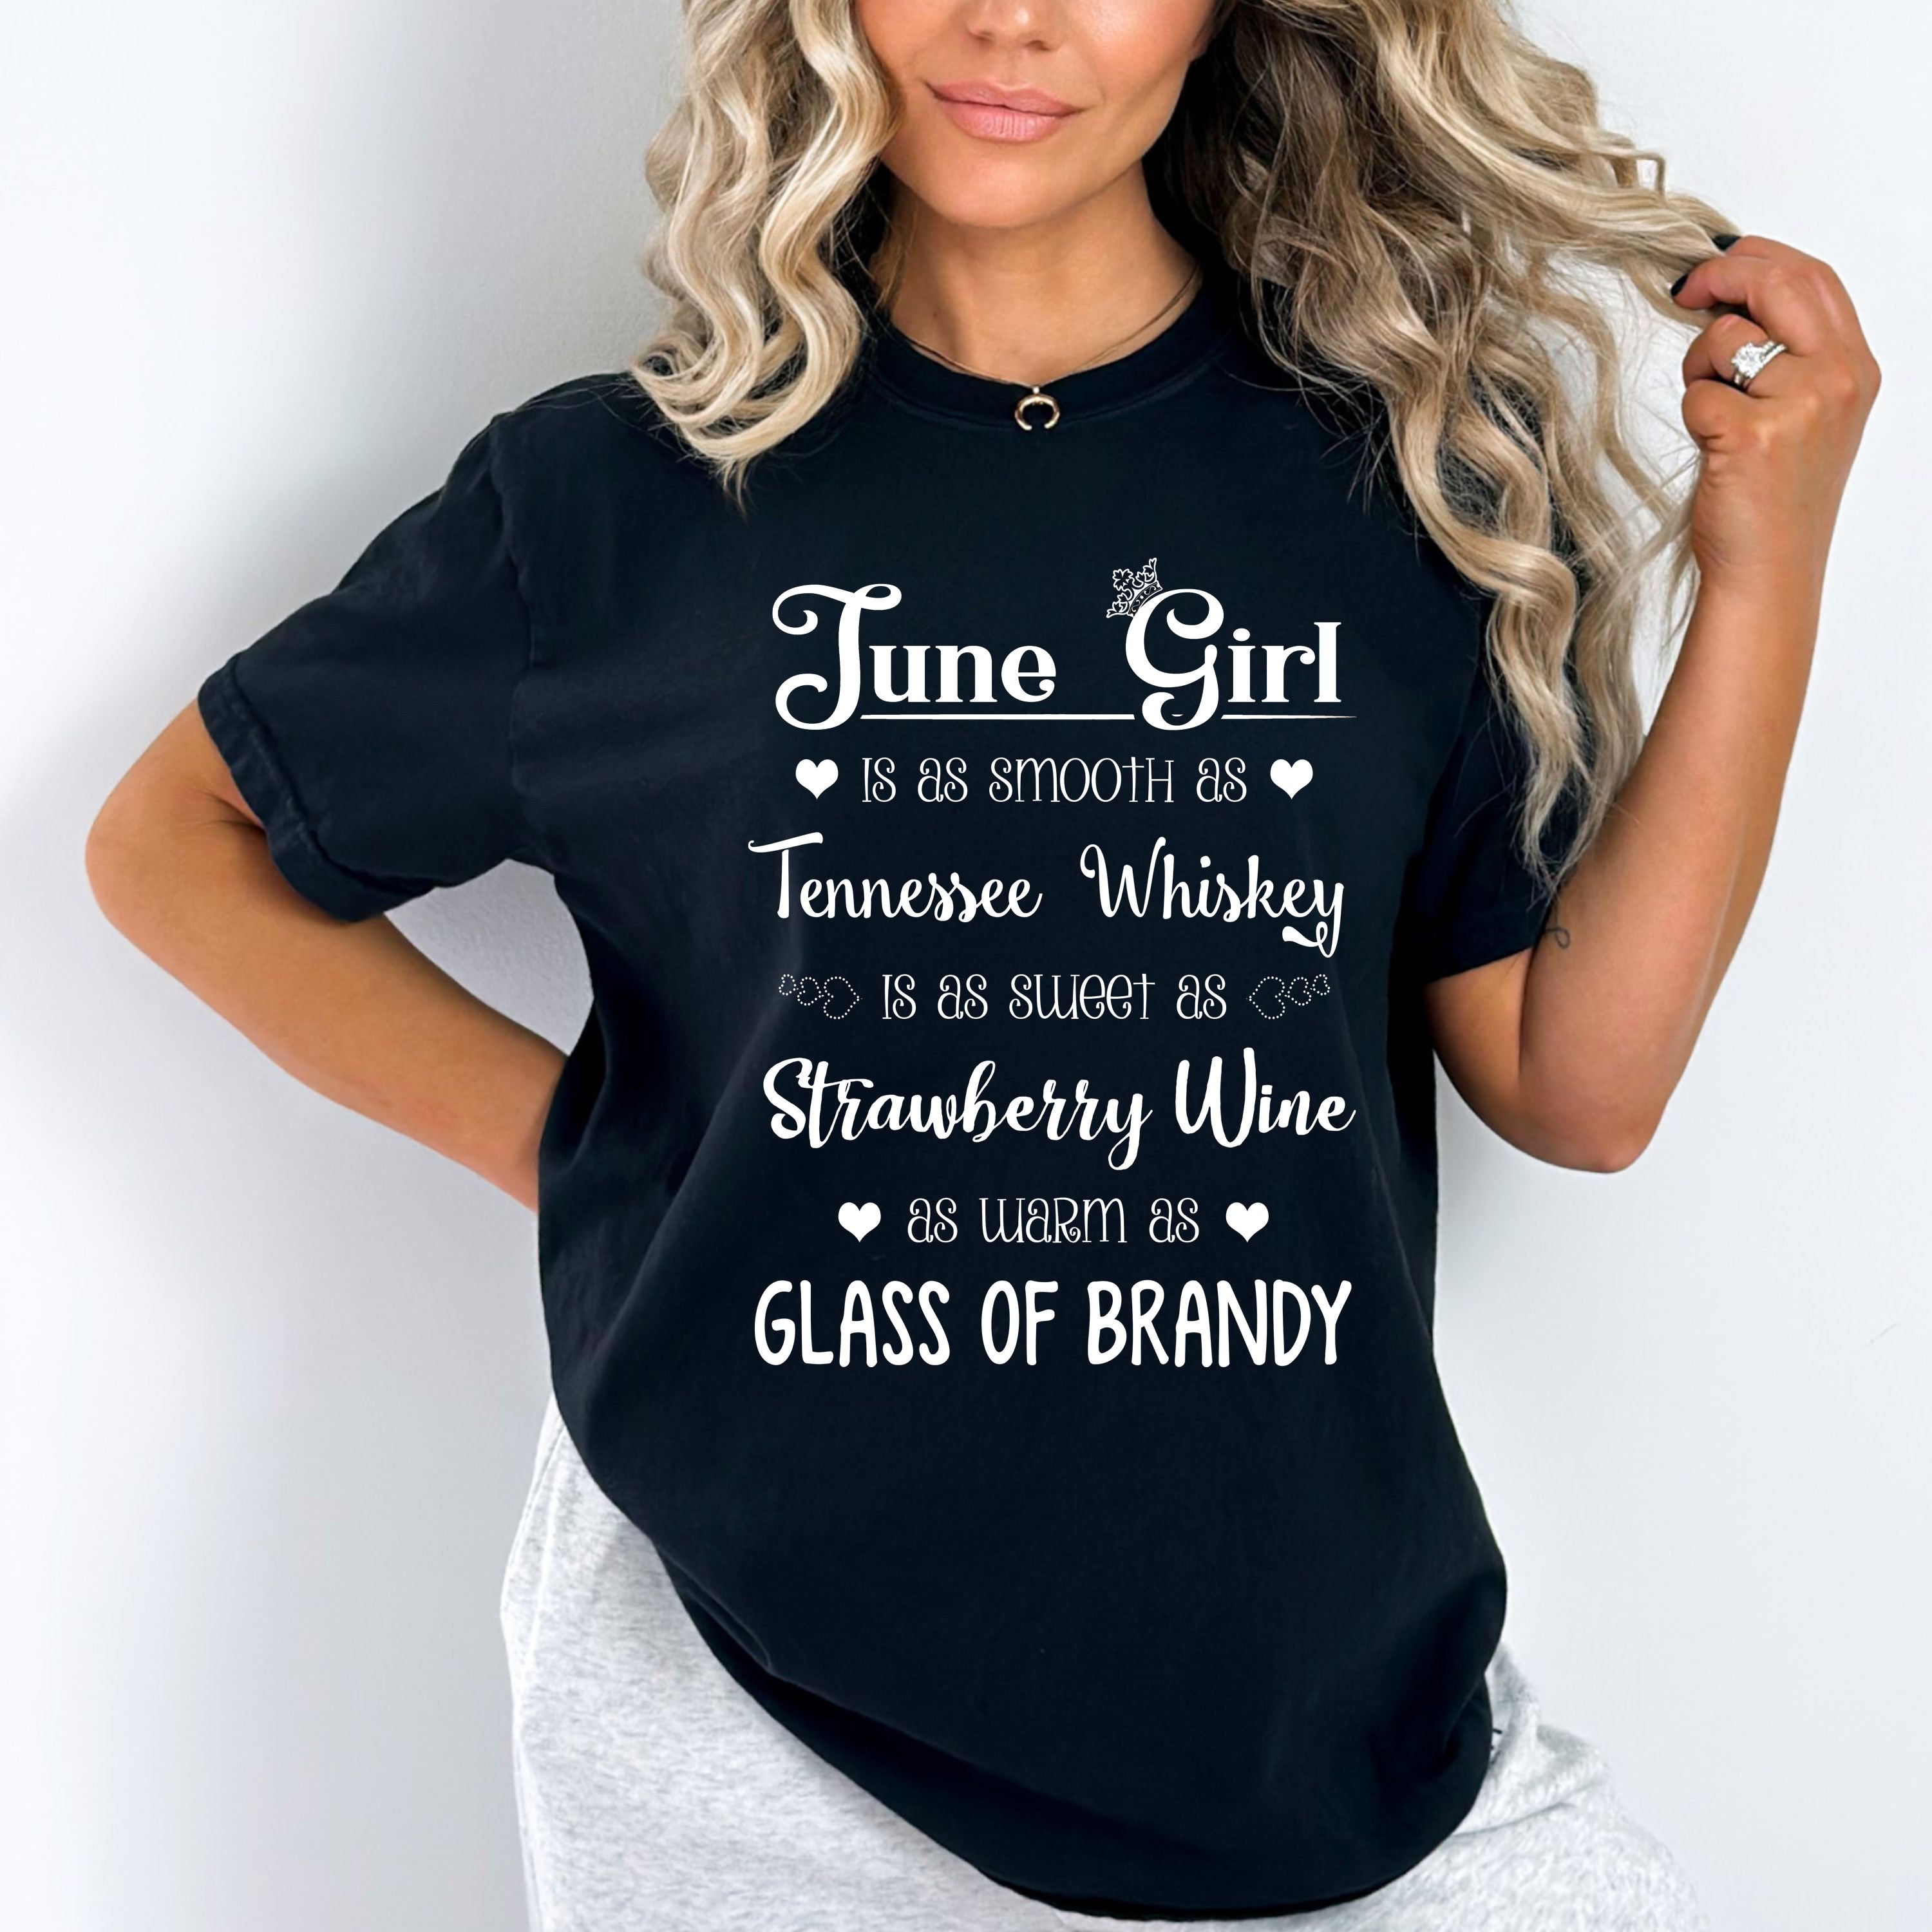 "June Girl Is As Smooth As Whiskey.........As Warm As Brandy"